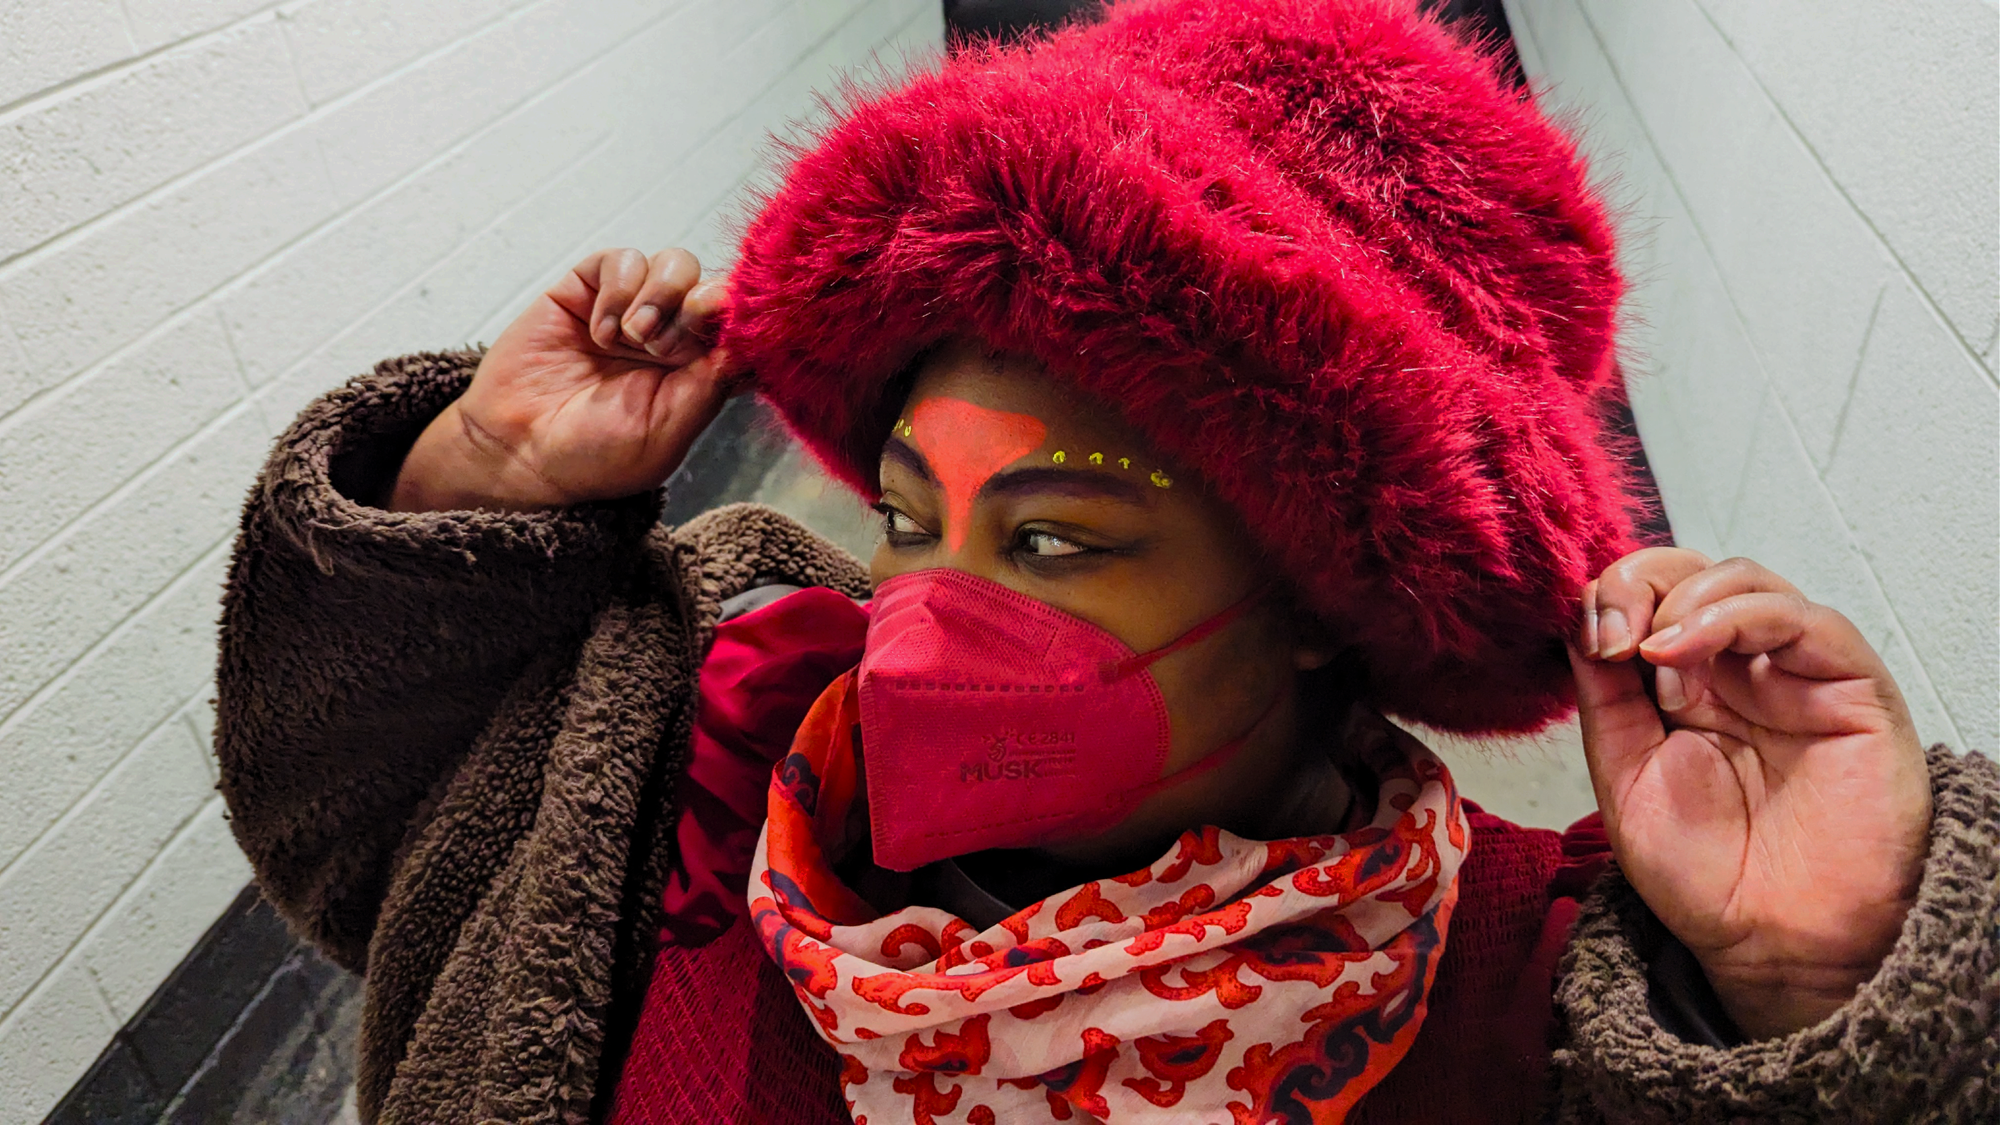 Love, Builder of Worlds is wearing a furry burgundy hat and n95 mask. They have colourful makeup on, red scarf and brown coat.